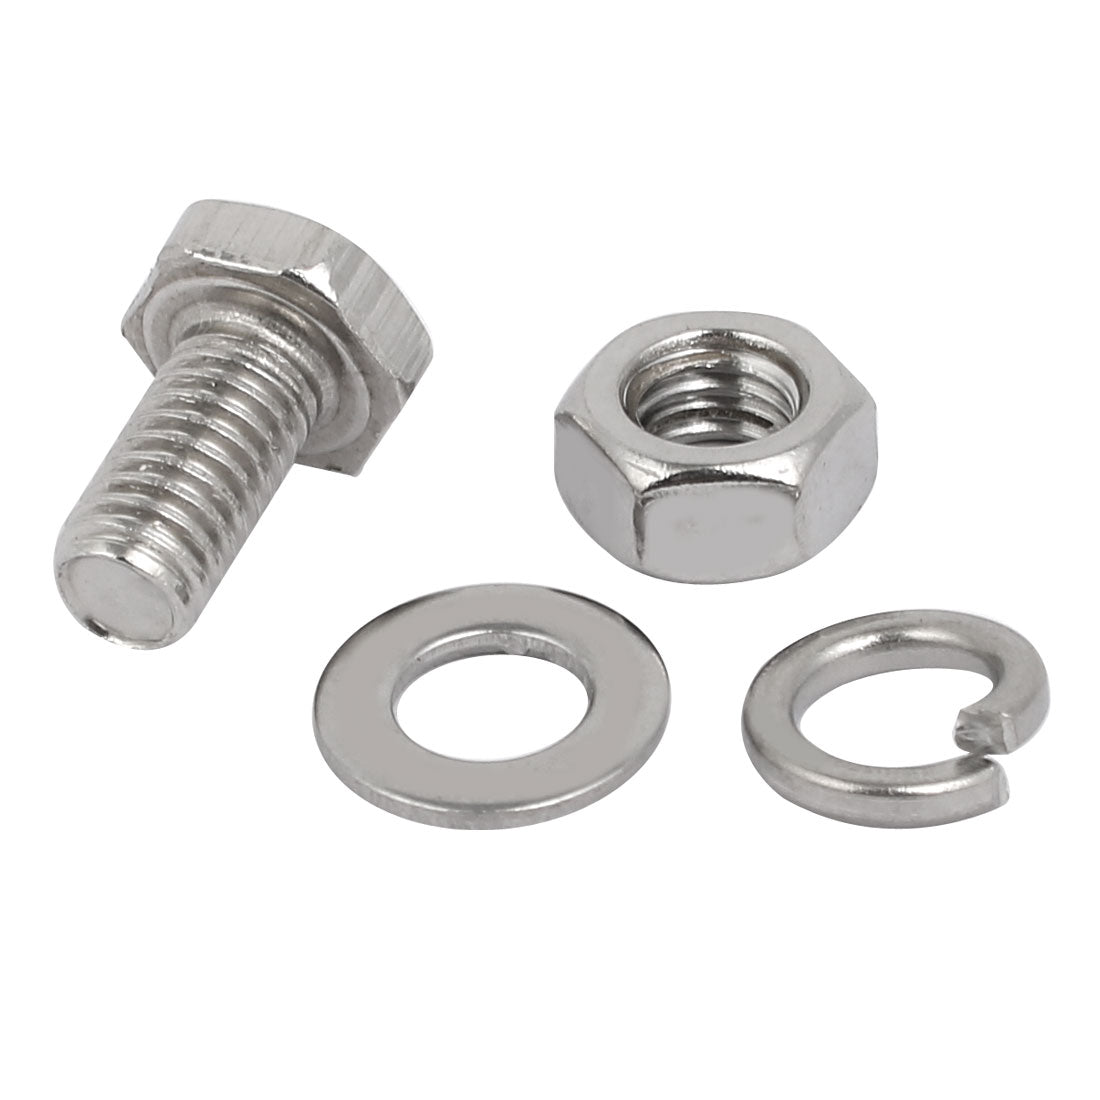 uxcell Uxcell 10pcs 304 Stainless Steel M6x12mm Hex Bolts w Nuts and Washers Assortment Kit